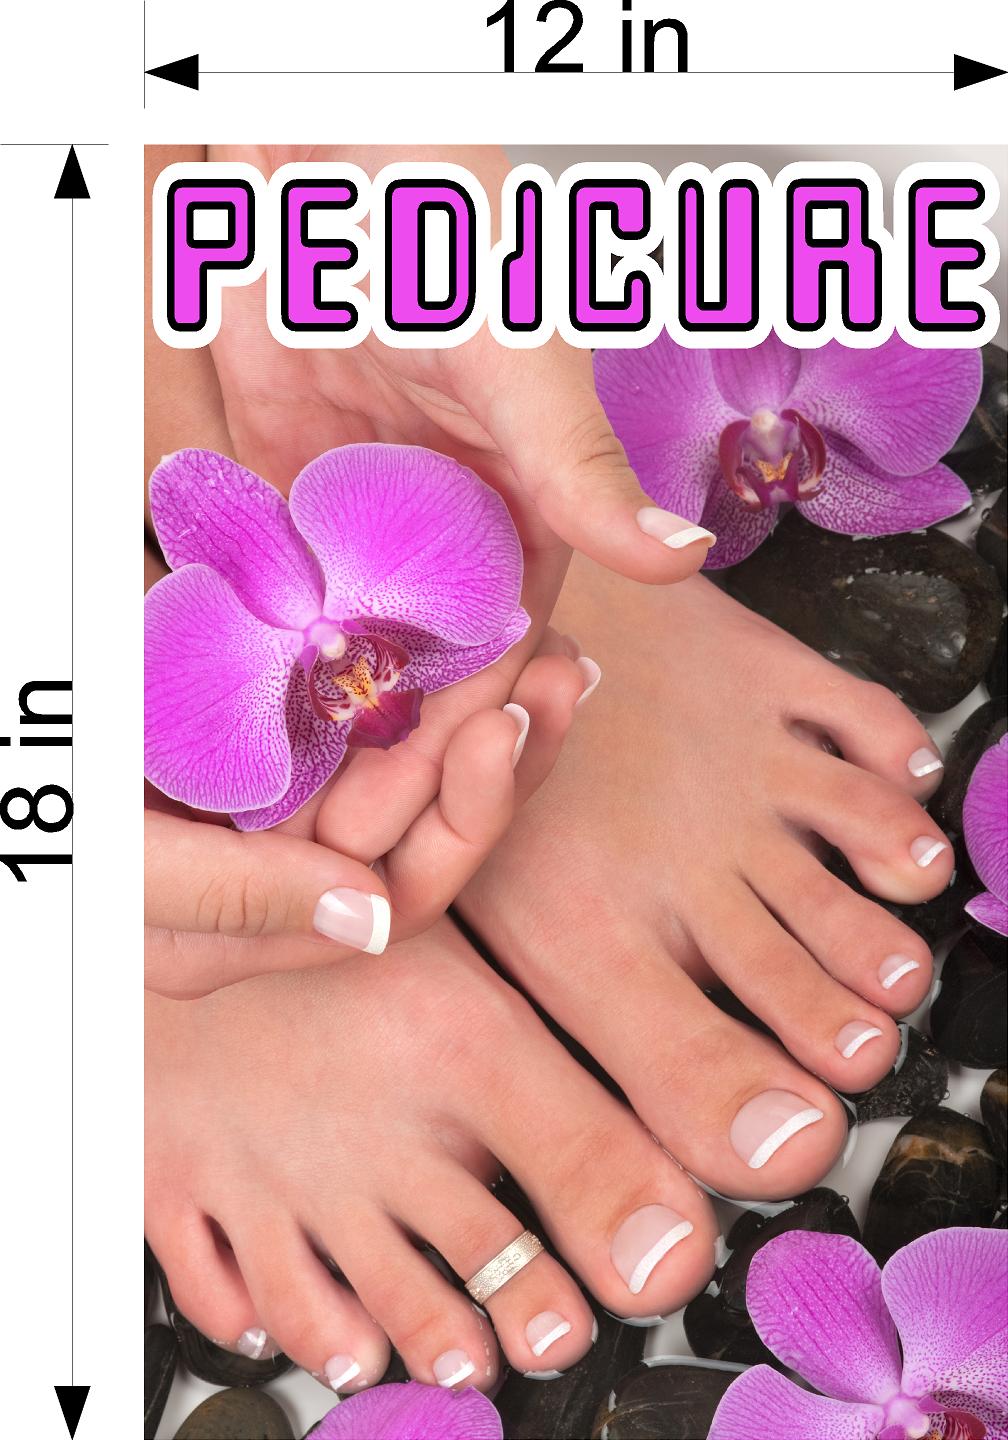 Pedicure 13 Wallpaper Poster Decal with Adhesive Backing Wall Sticker Decor Indoors Interior Sign Vertical